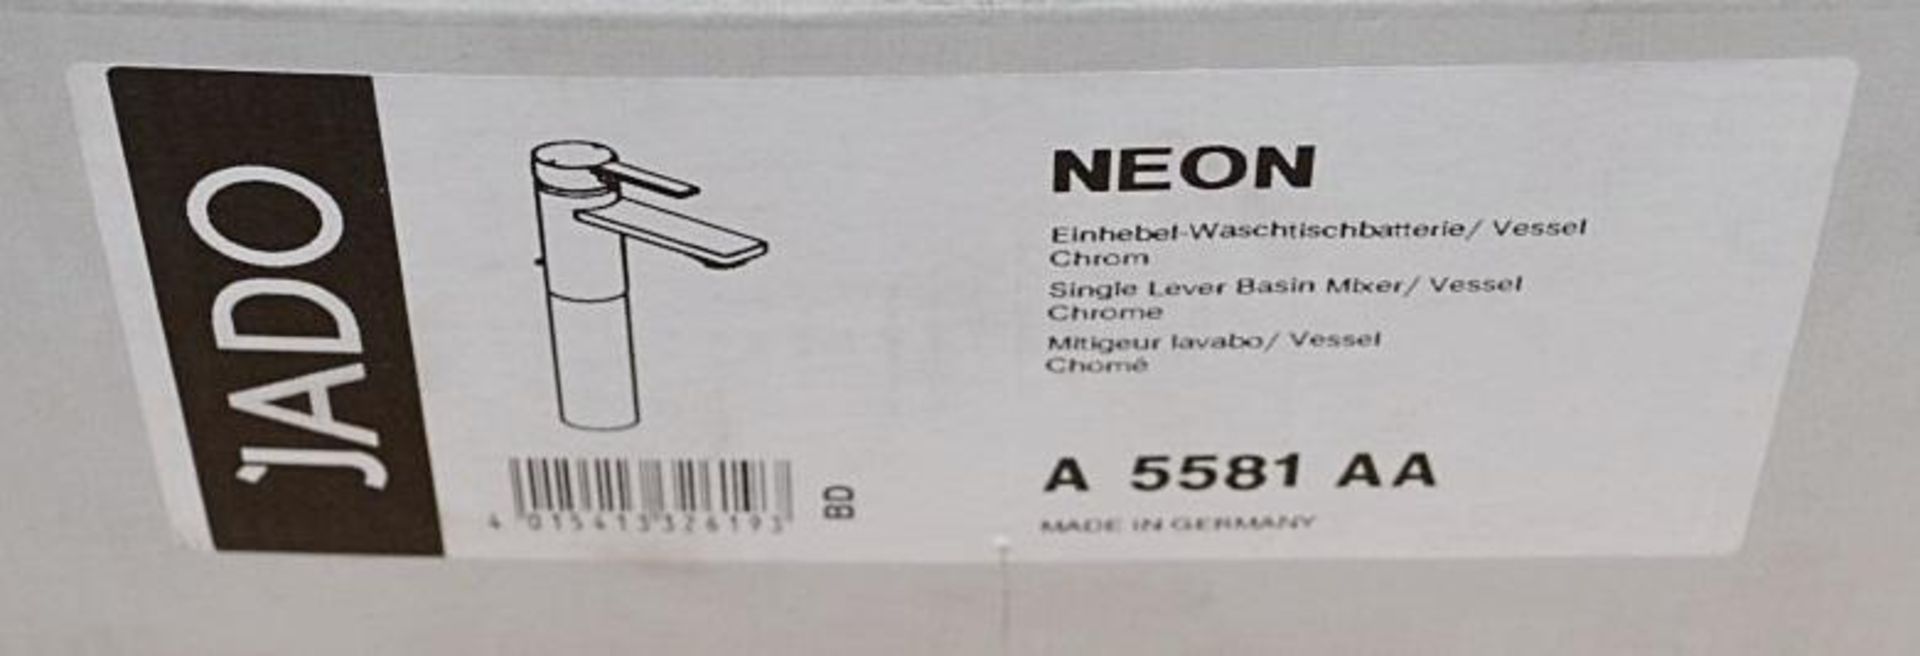 1 x Ideal Standard JADO "Neon" Vessel Single Lever Basin Mixer With Waste (A5581AA) - New / Unused B - Image 3 of 10